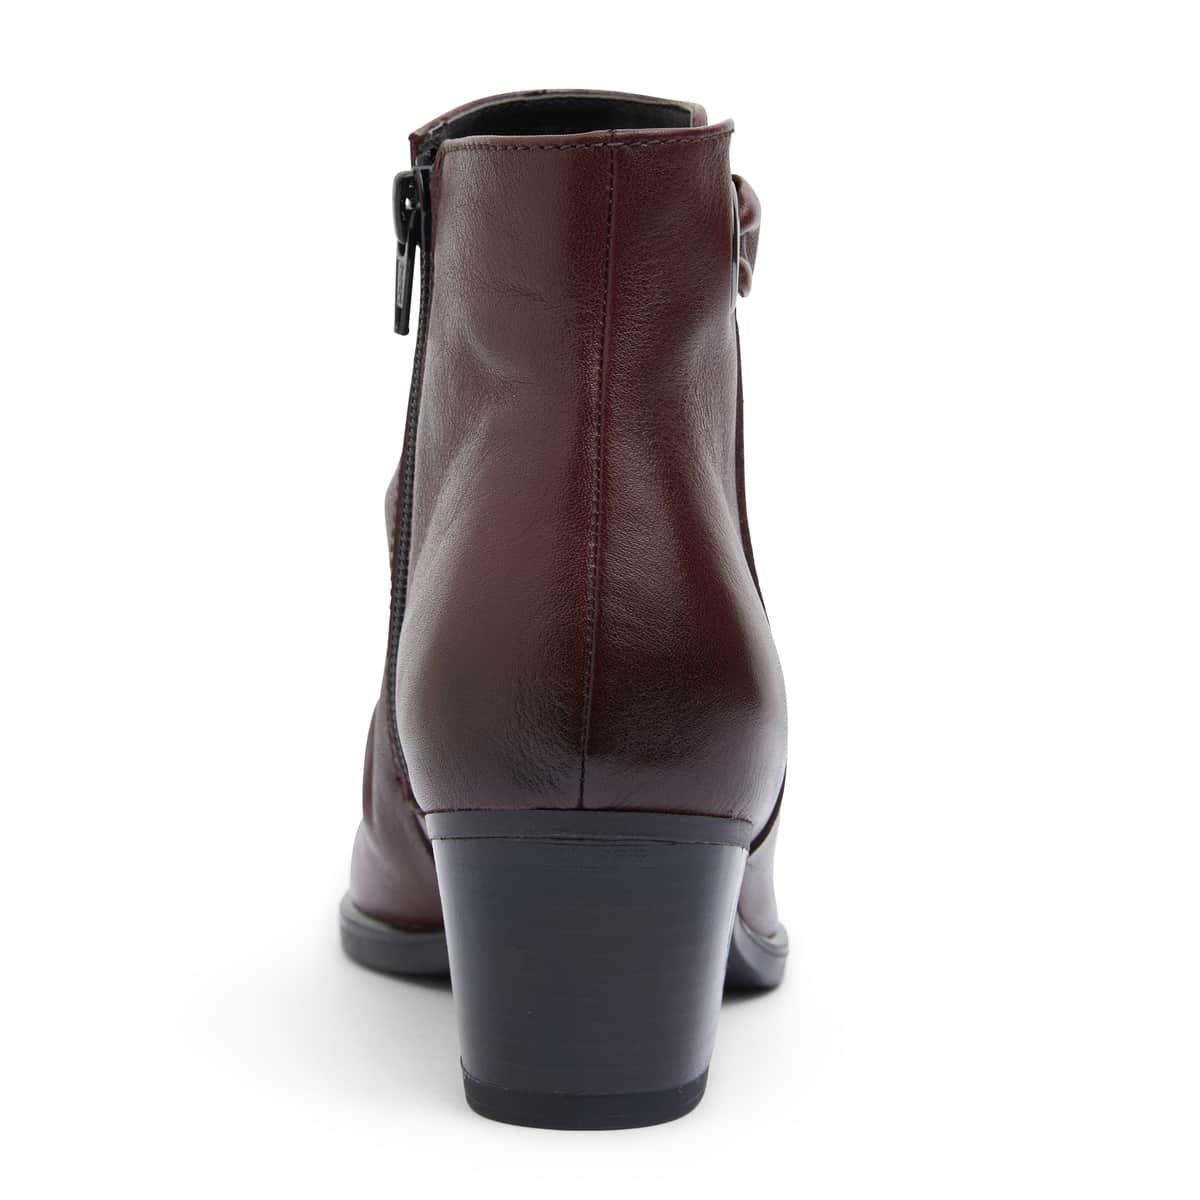 Cagney Boot in Burgundy Leather